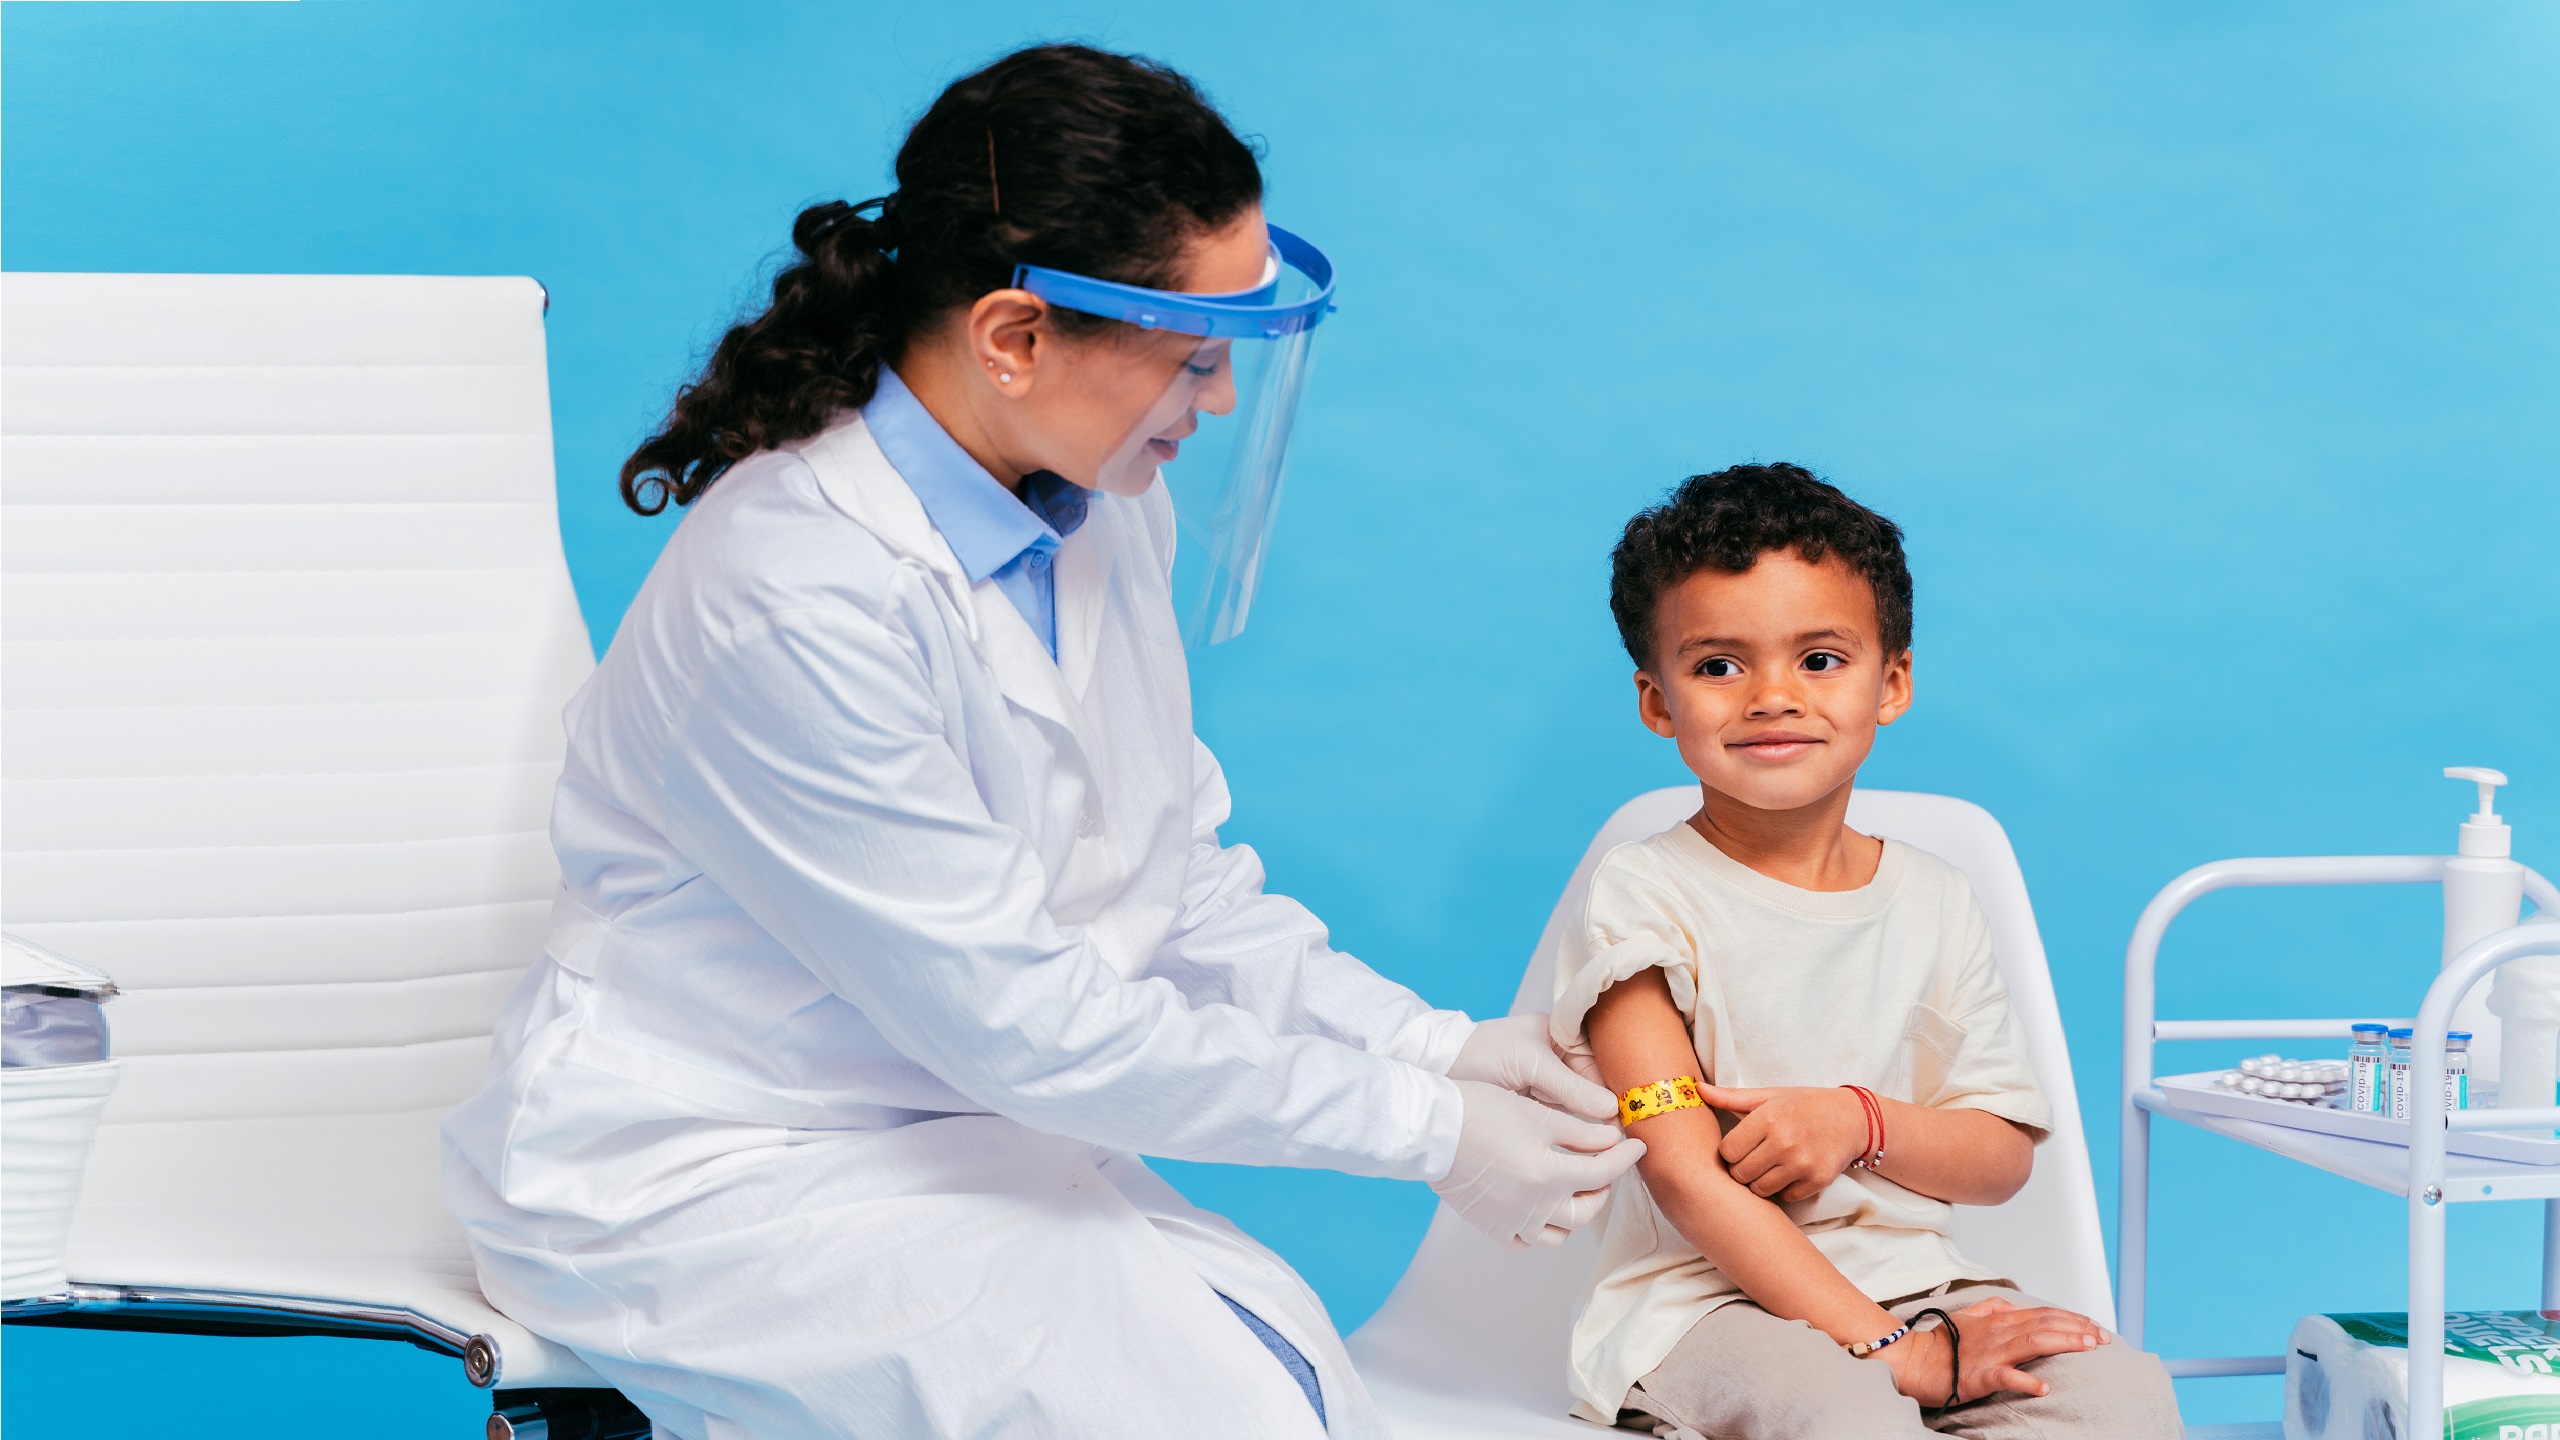 Children in MENA Countries Are Increasingly Eligible for COVID-19 Vaccination